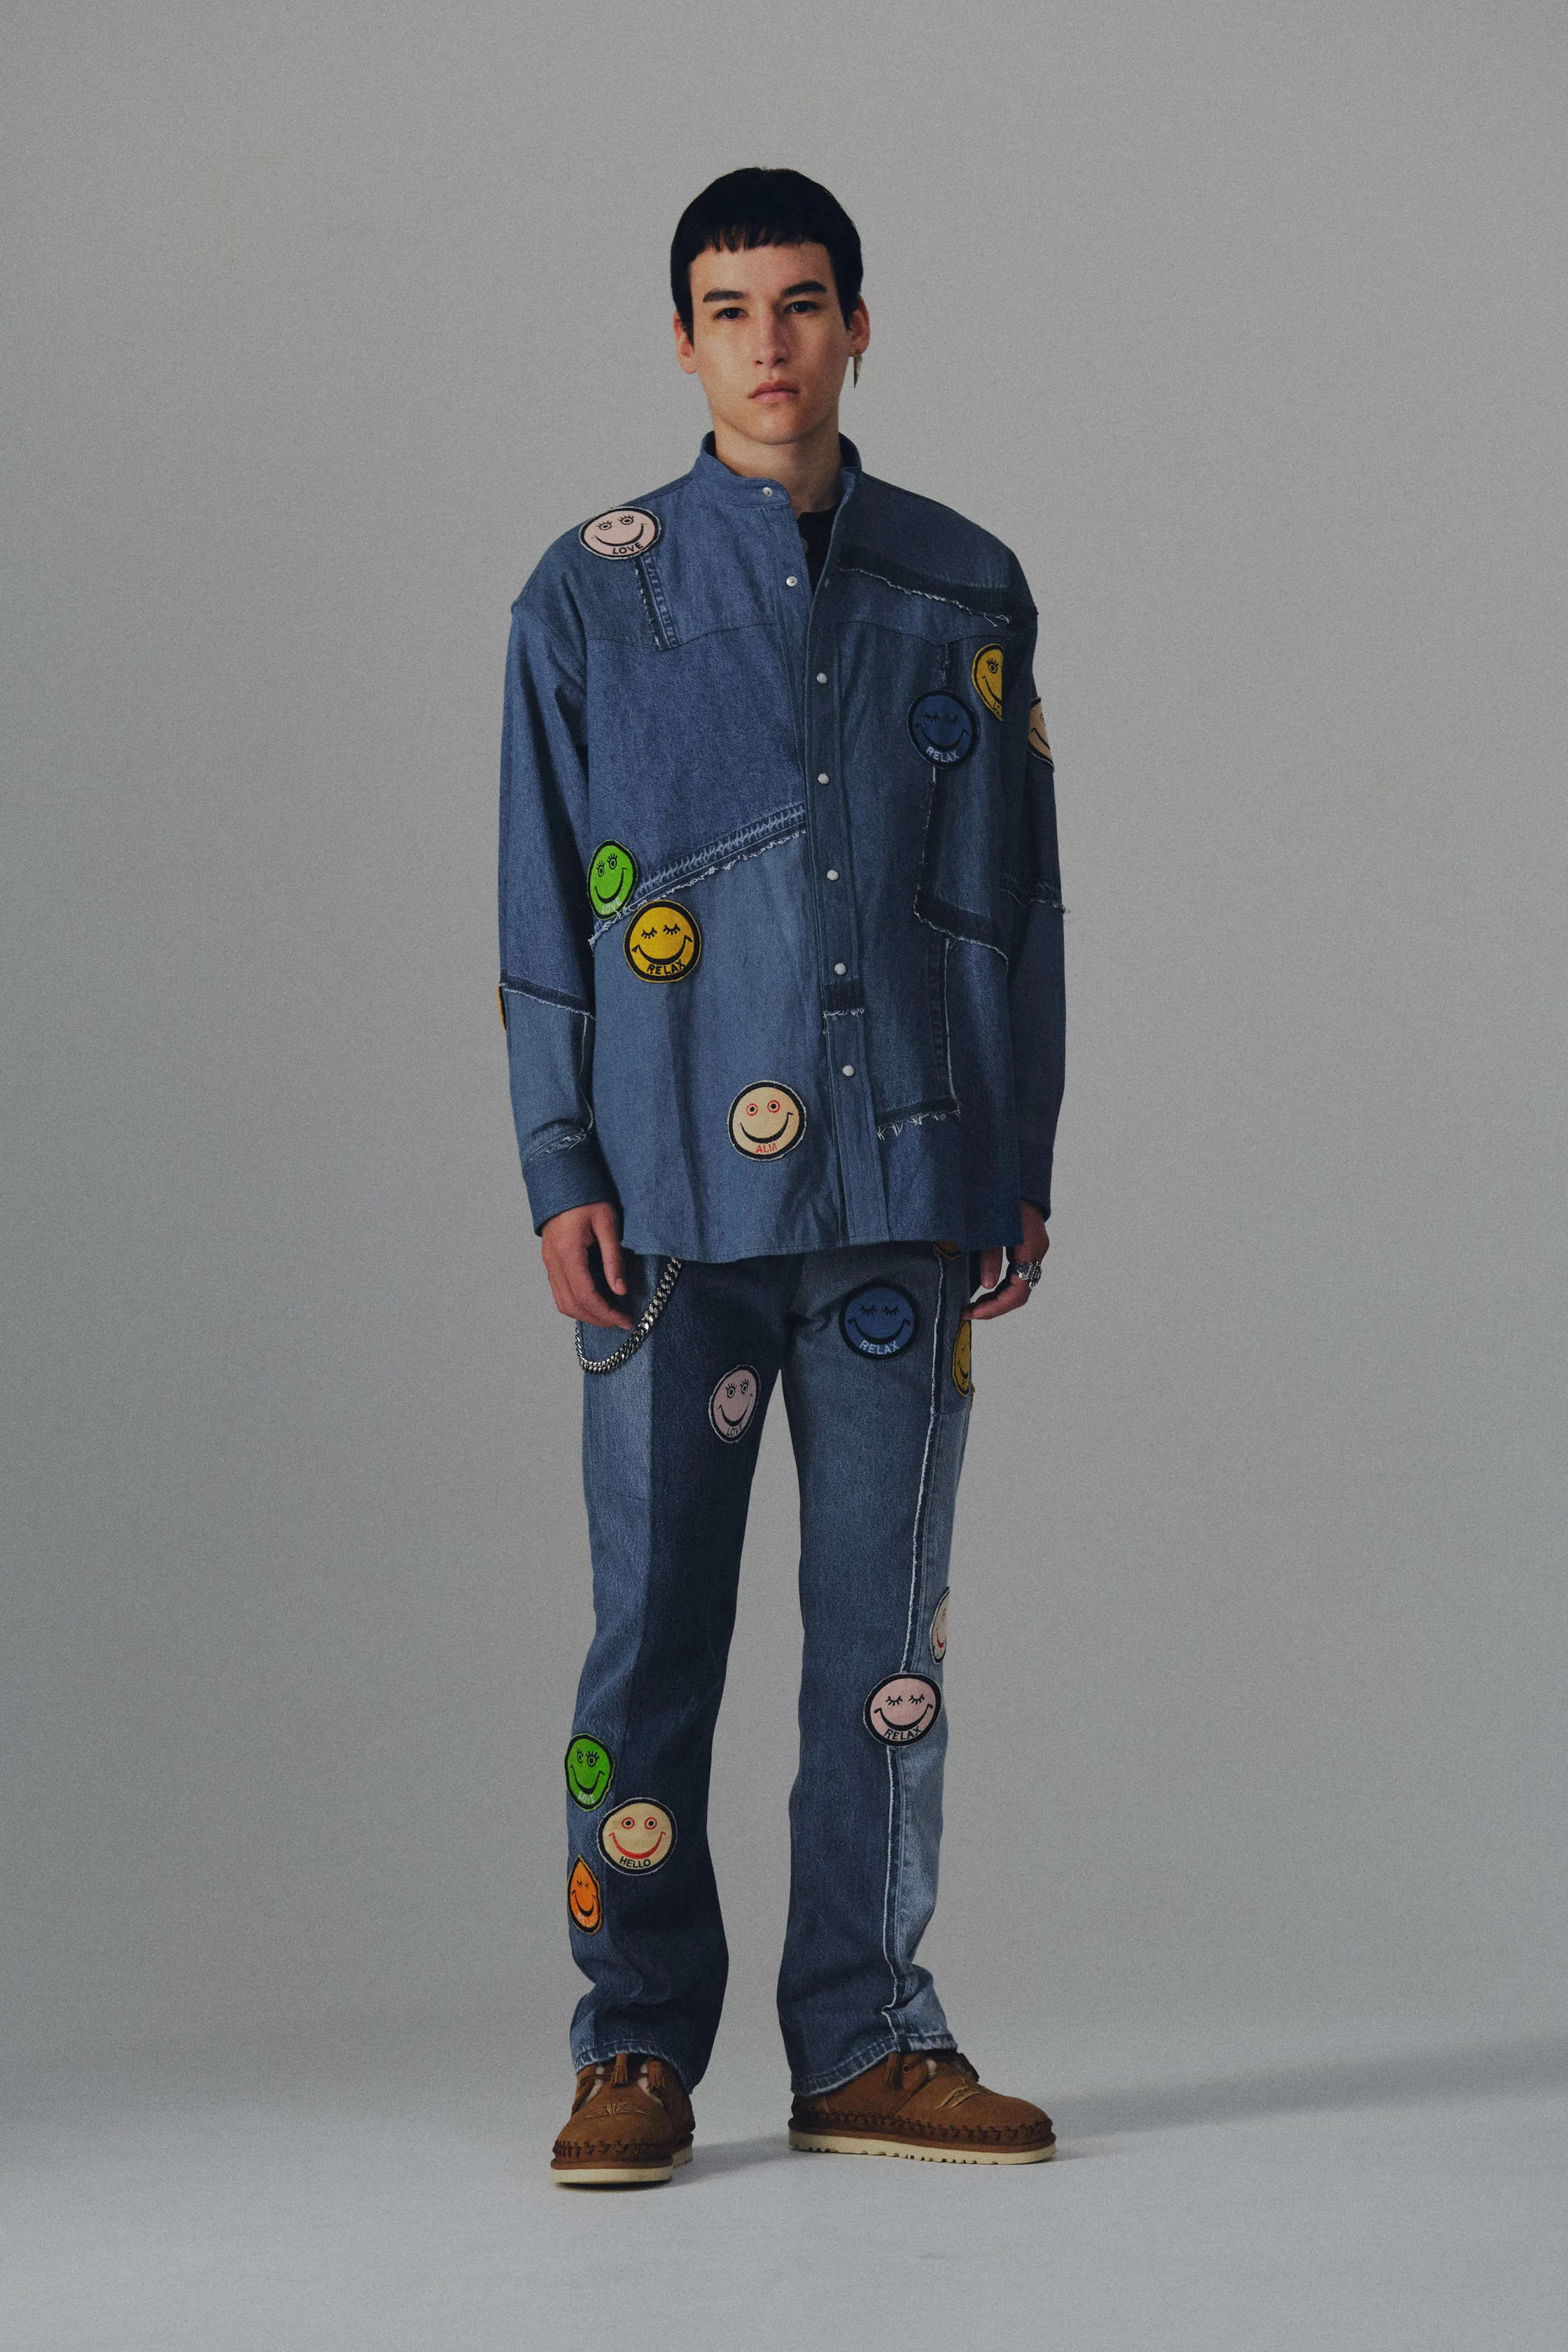 00014-Children-of-the-Discordance-Mens-Fall-22-credit-brand.png